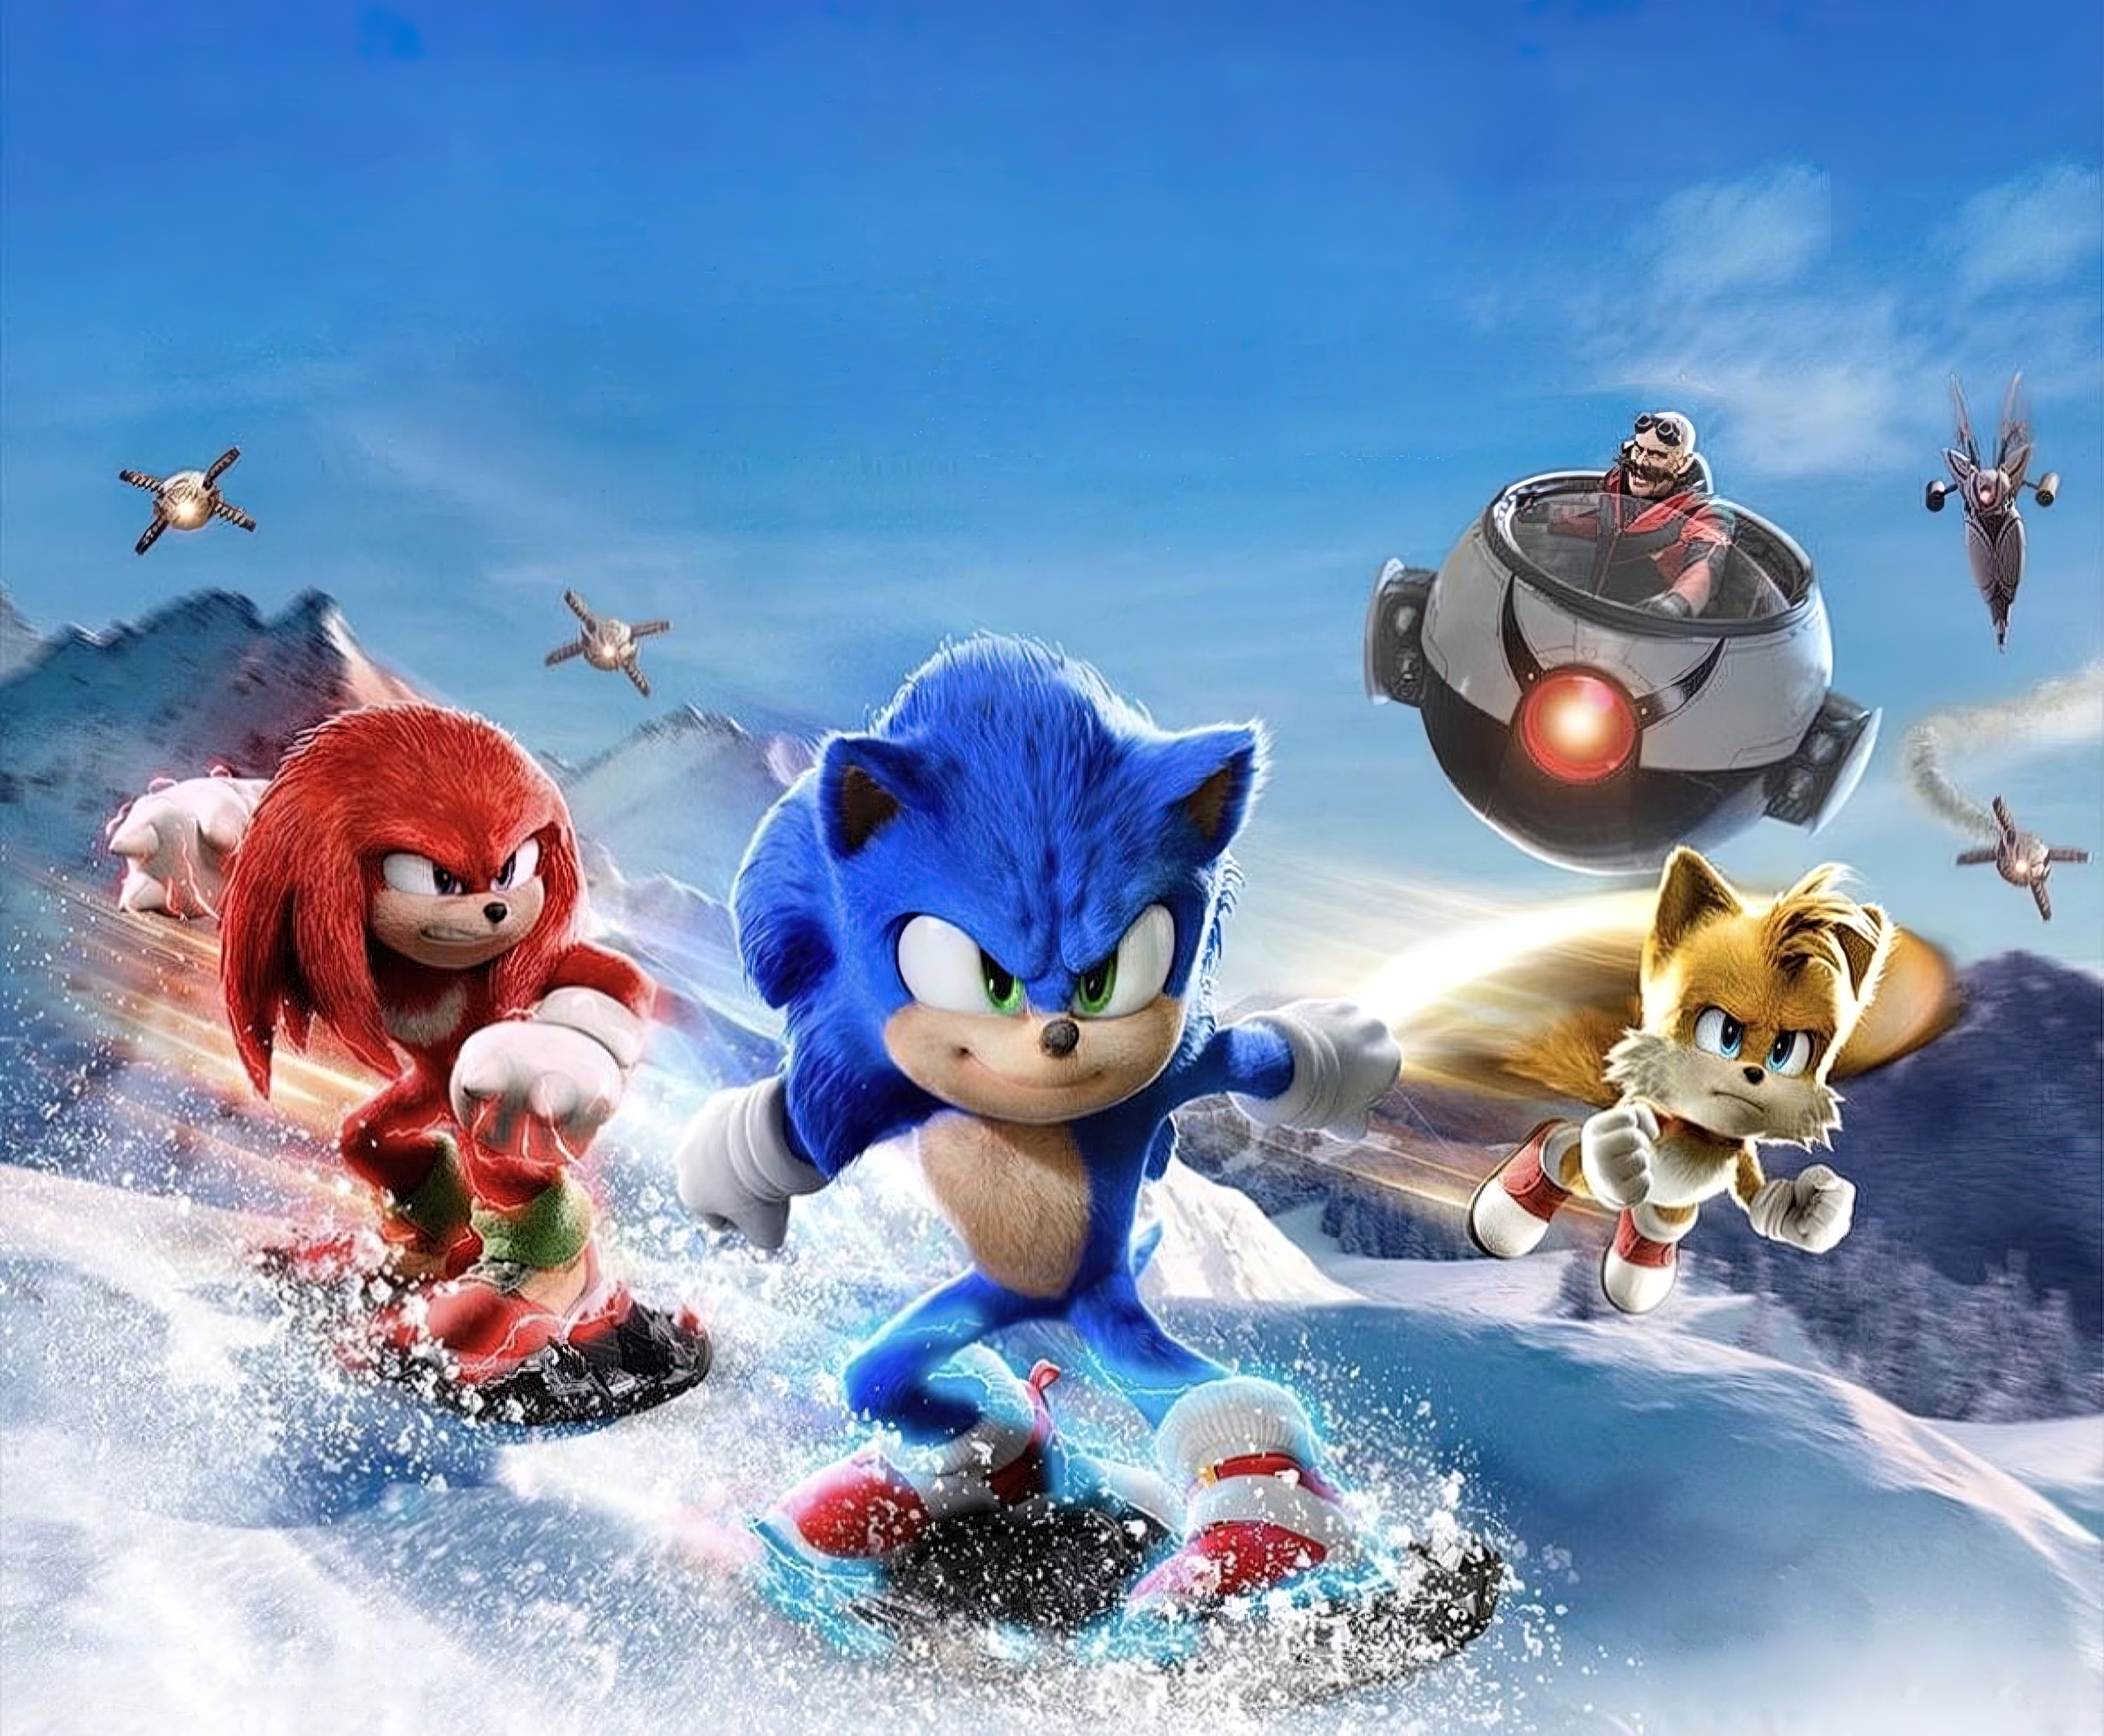 Sonic Movie Poster Sonic 2 The Movie Paramount Movie Characters Movie Screenshots Fox Hedgehog Tails 6000x4950